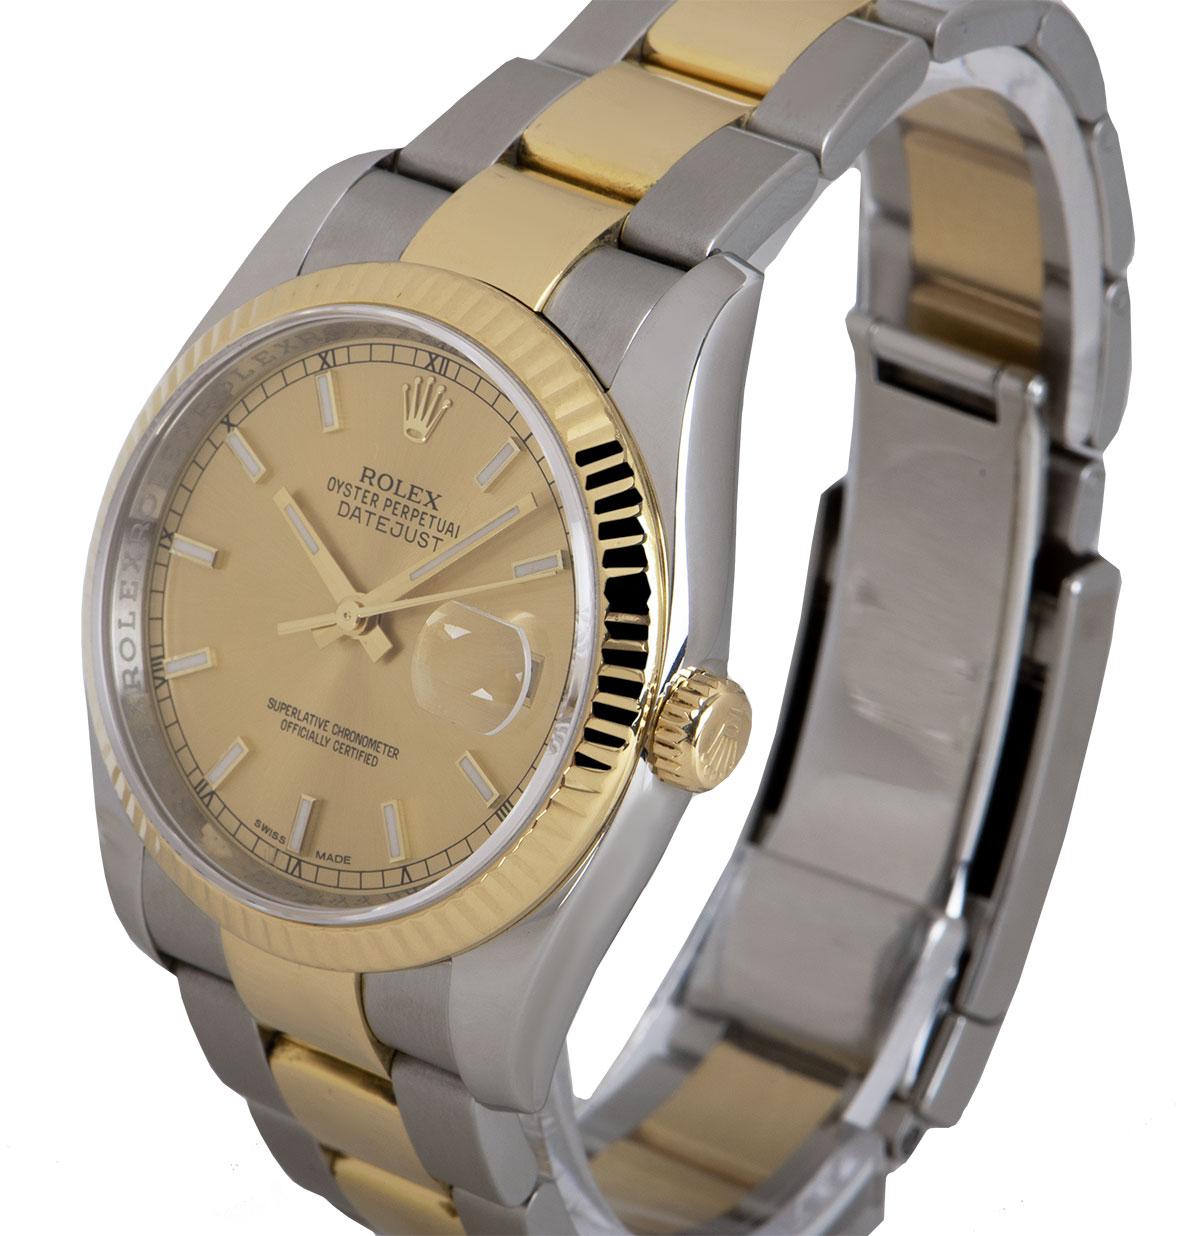 A 36 mm Stainless Steel & 18k Yellow Gold Oyster Perpetual Datejust Gents Wristwatch, champagne dial with applied hour markers, date at 3 0'clock, a fixed 18k yellow gold fluted bezel, a stainless steel and 18k yellow gold oyster bracelet with a